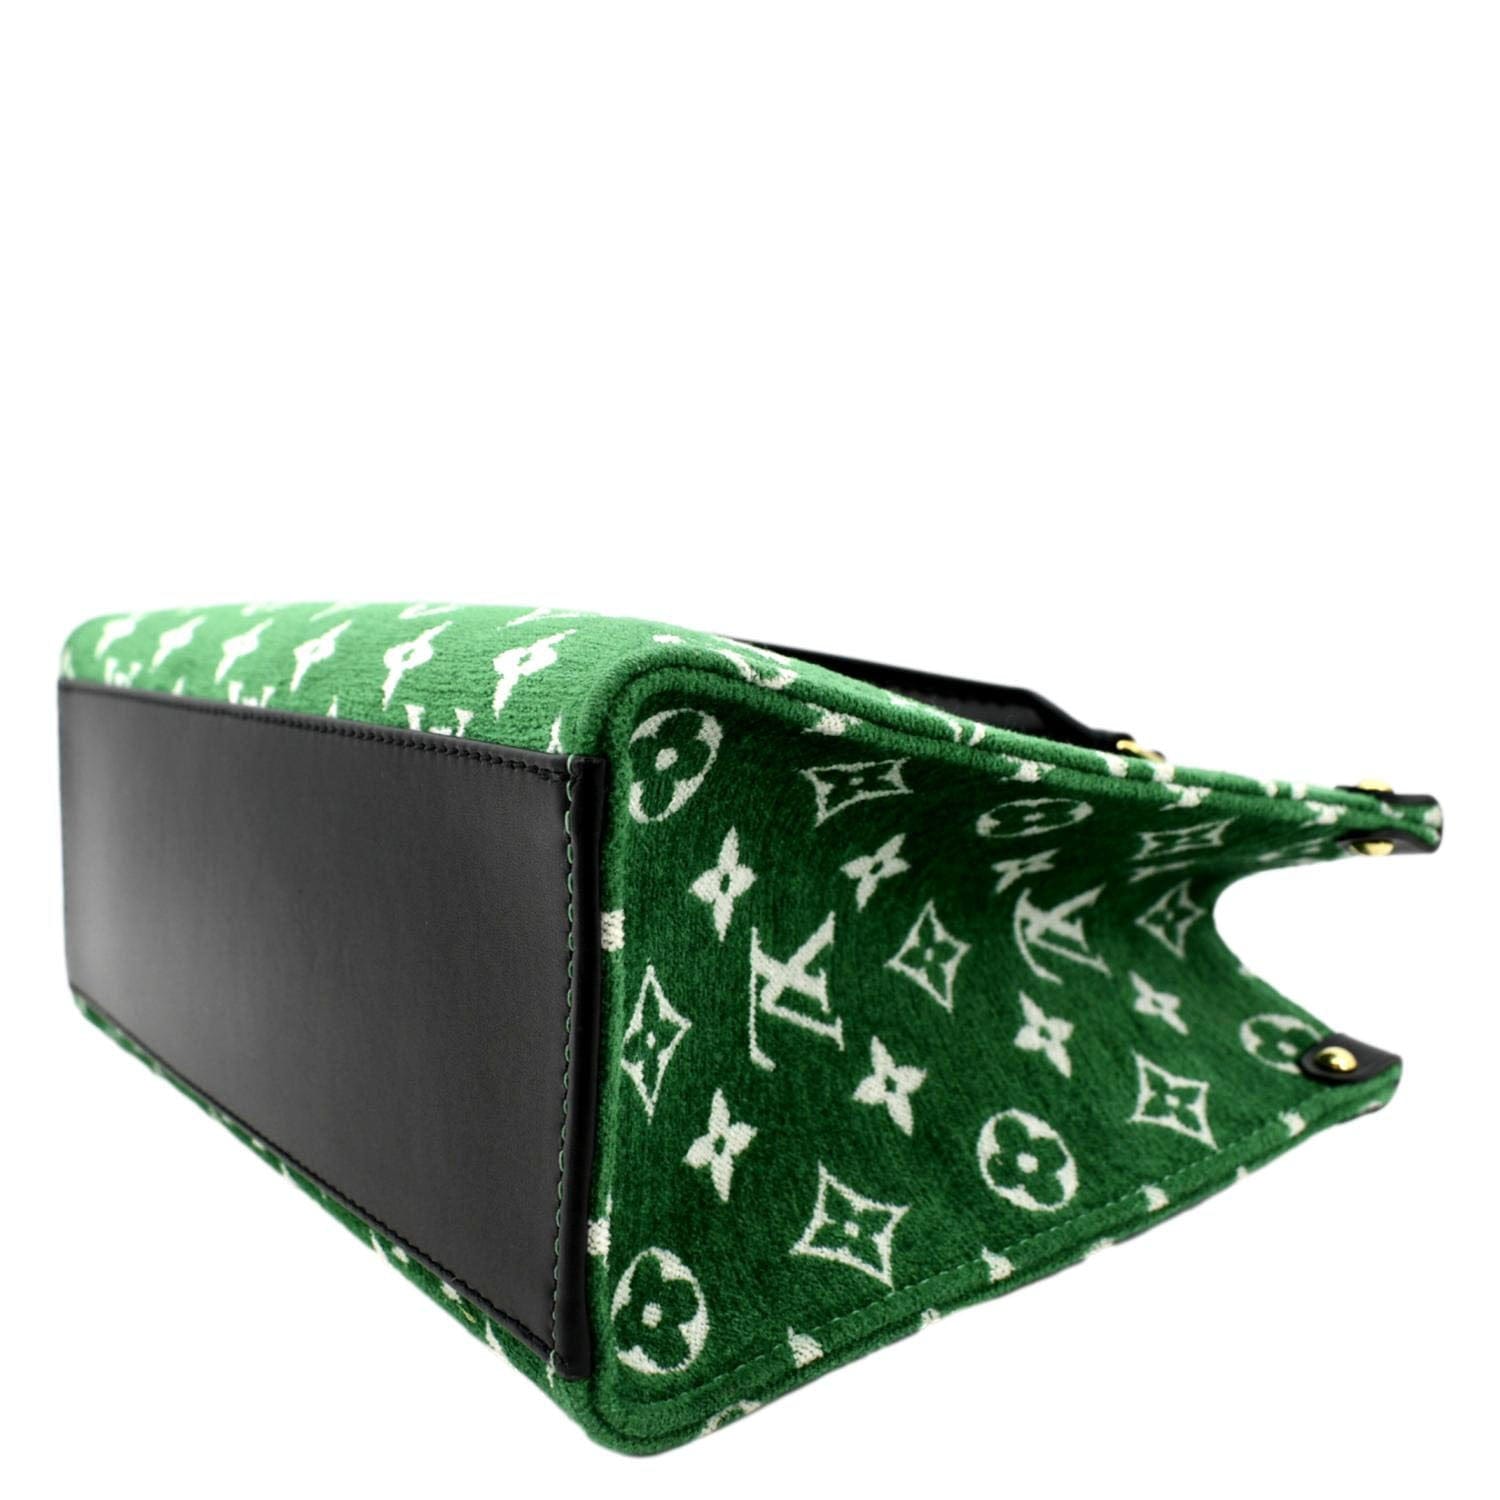 NEW Louis Vuitton Limited Edition Wallet Damier Green Leather in